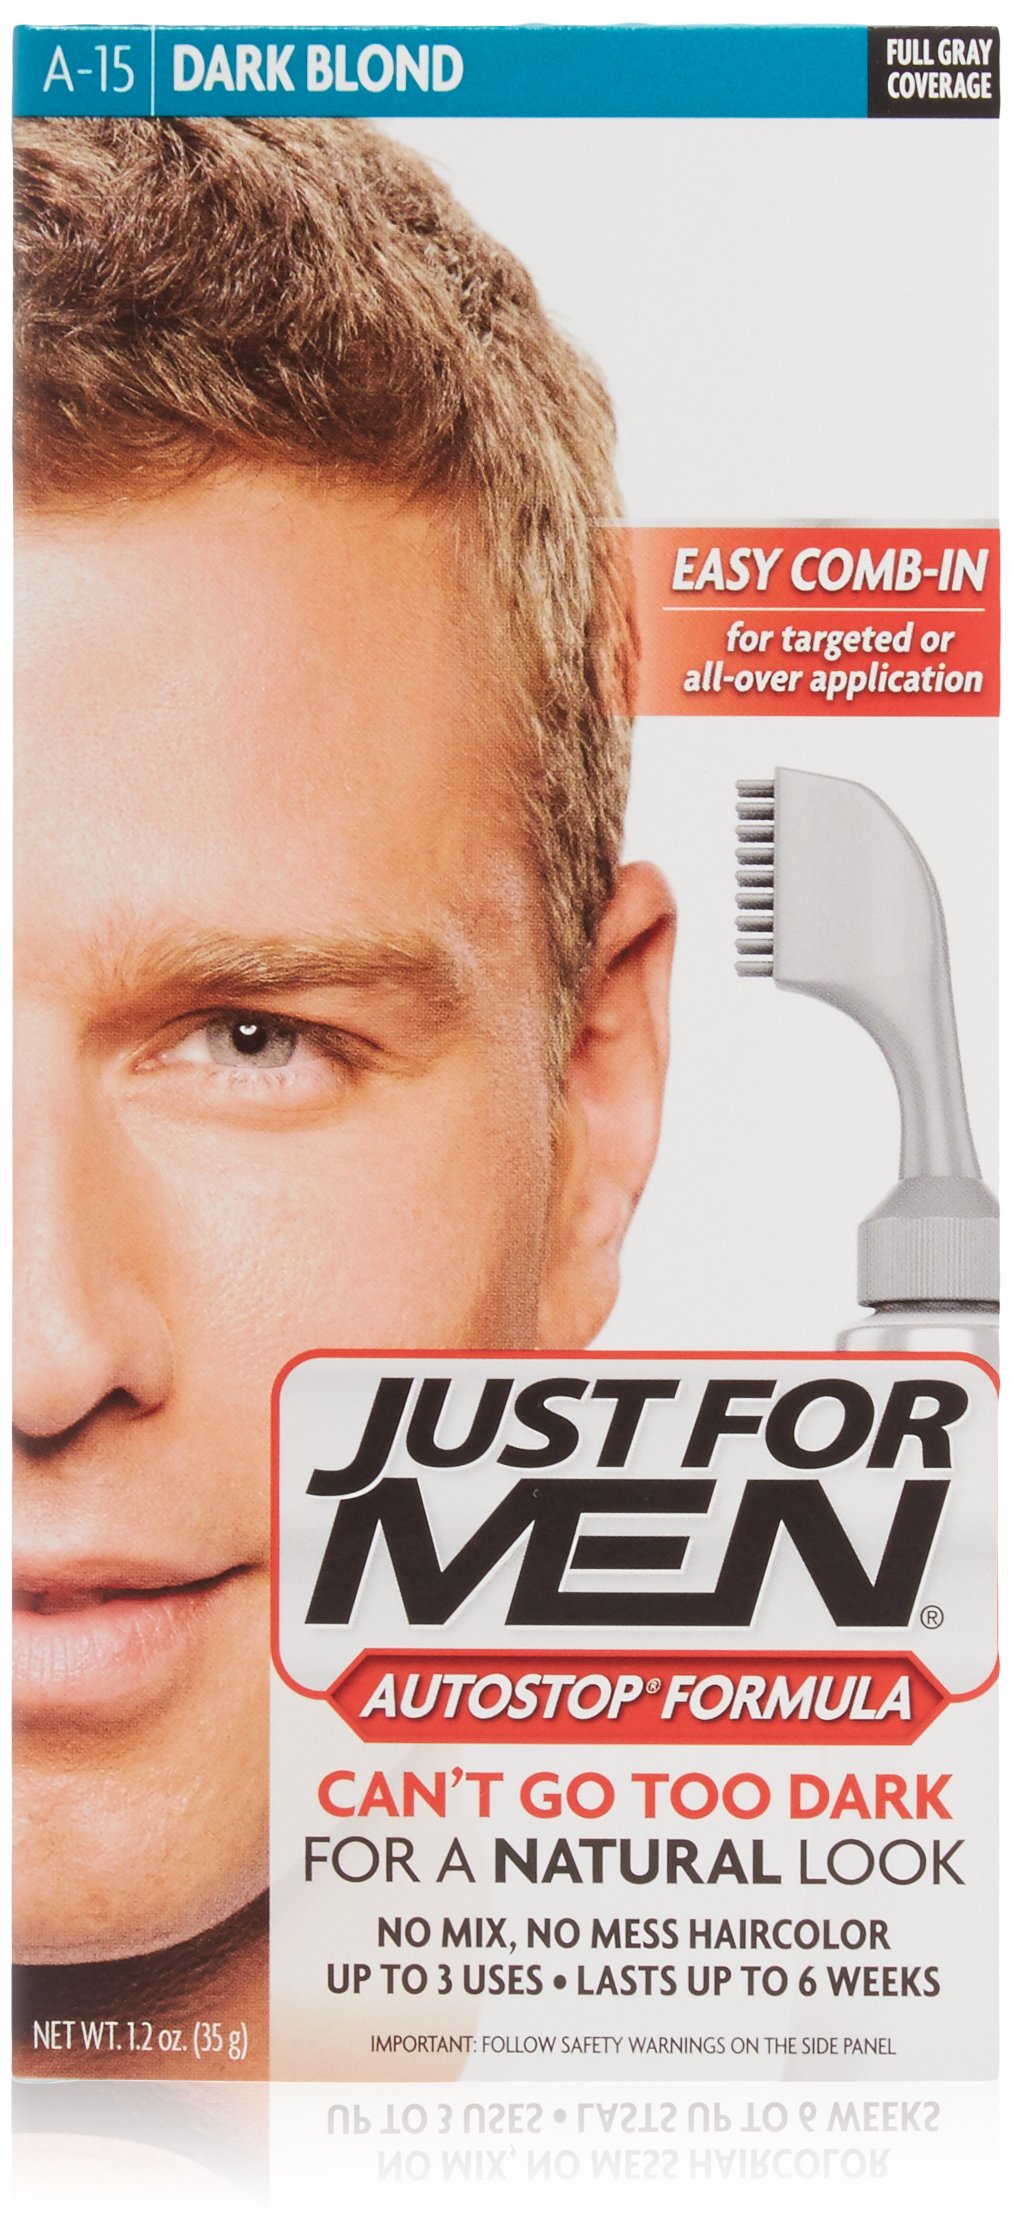 Just For Men Autostop Men's Hair Color, Dark Blond, 1.6 Ounce (Pack of 12)